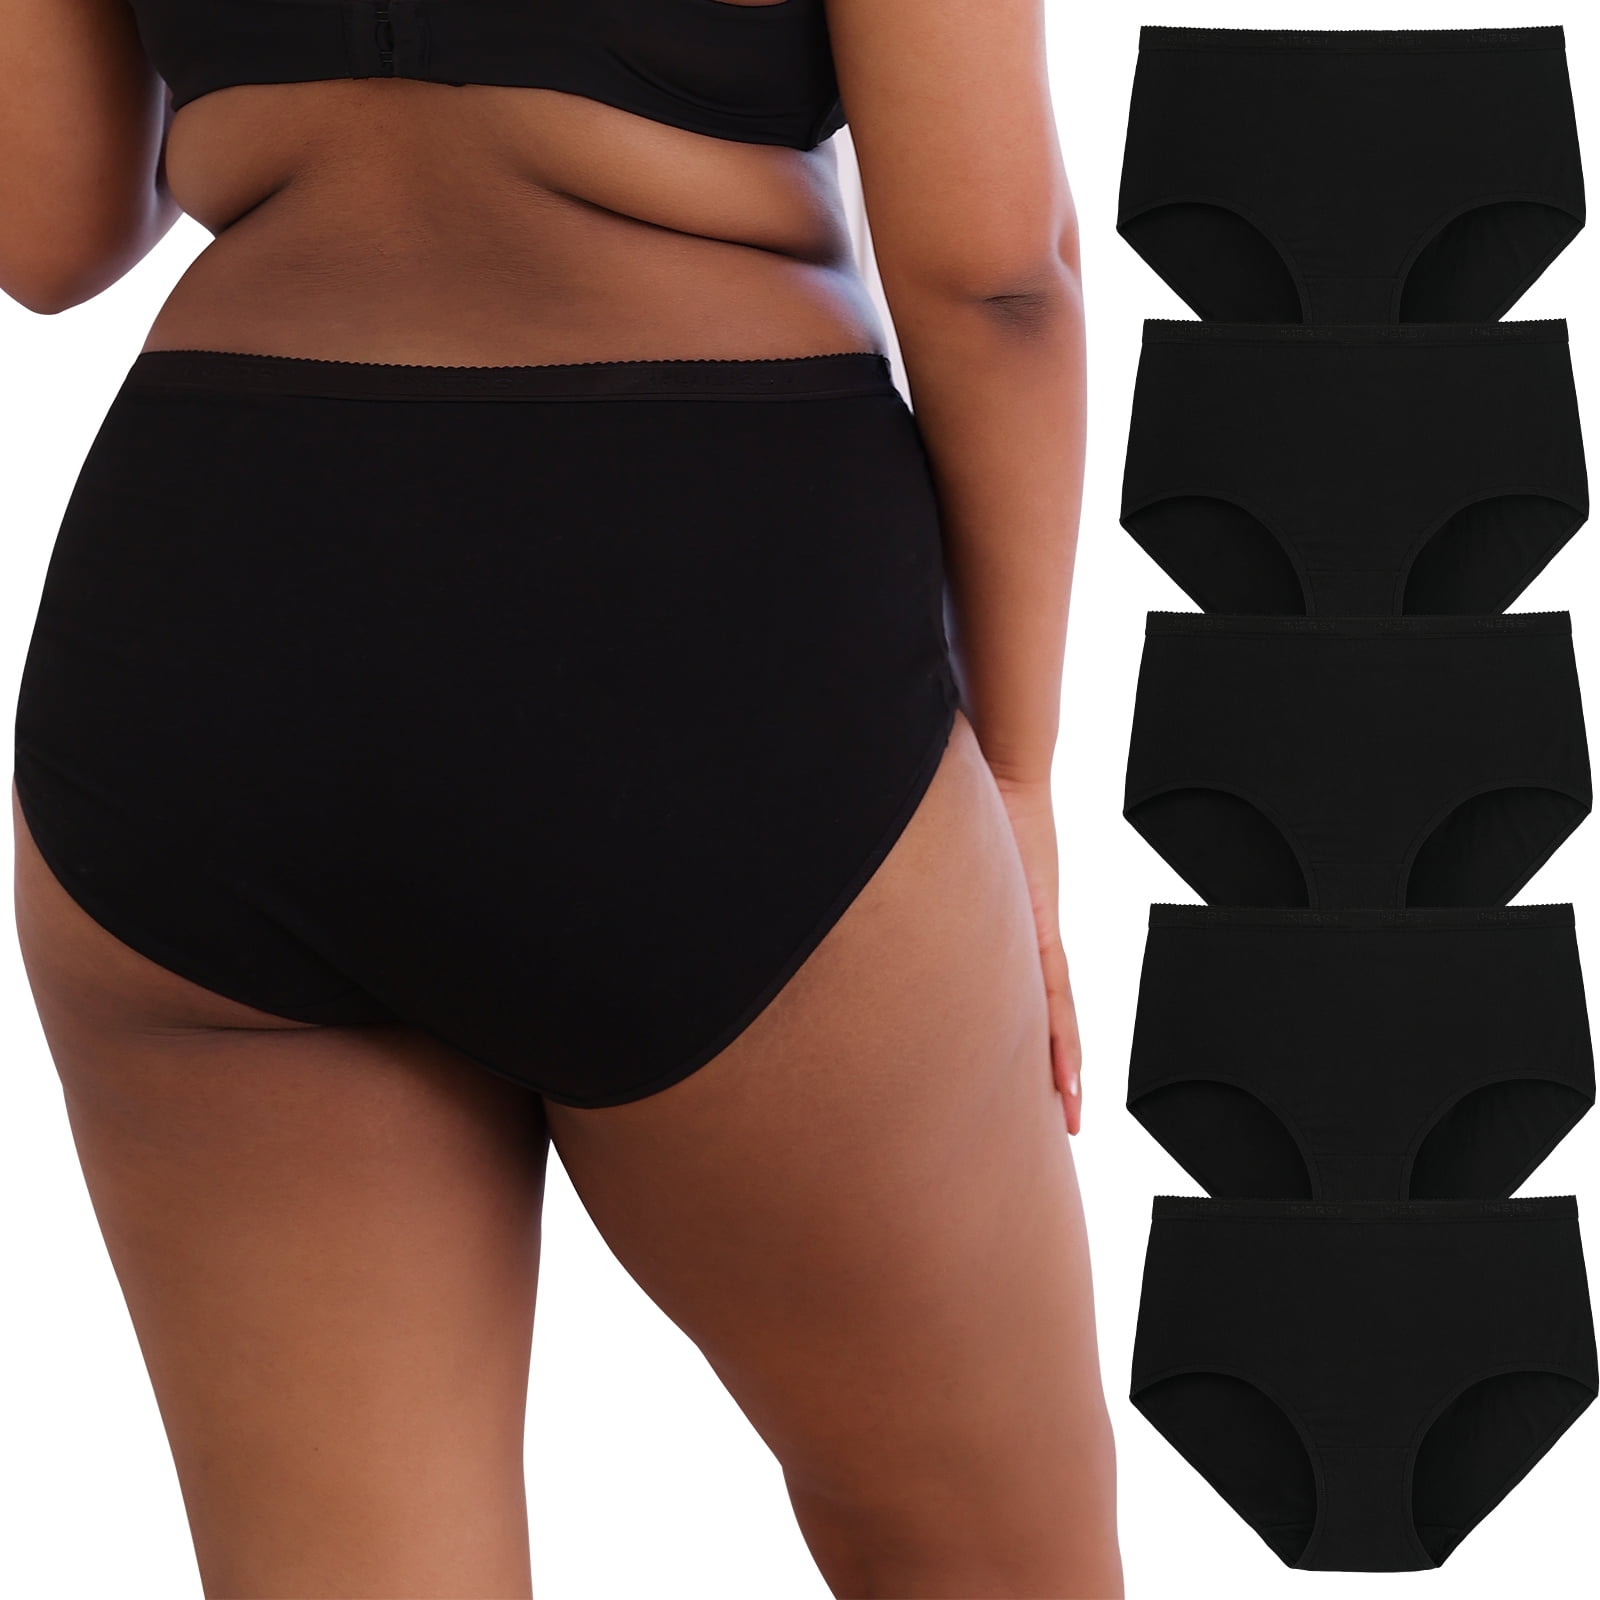 FUNCILAC Plus Size Lace Hipster Briefs Womens With Print Design And Cotton  Crotch For Women Mid Rise Lingerie In 2XL 4XL Sizes 5 Pack From Bai01,  $11.53